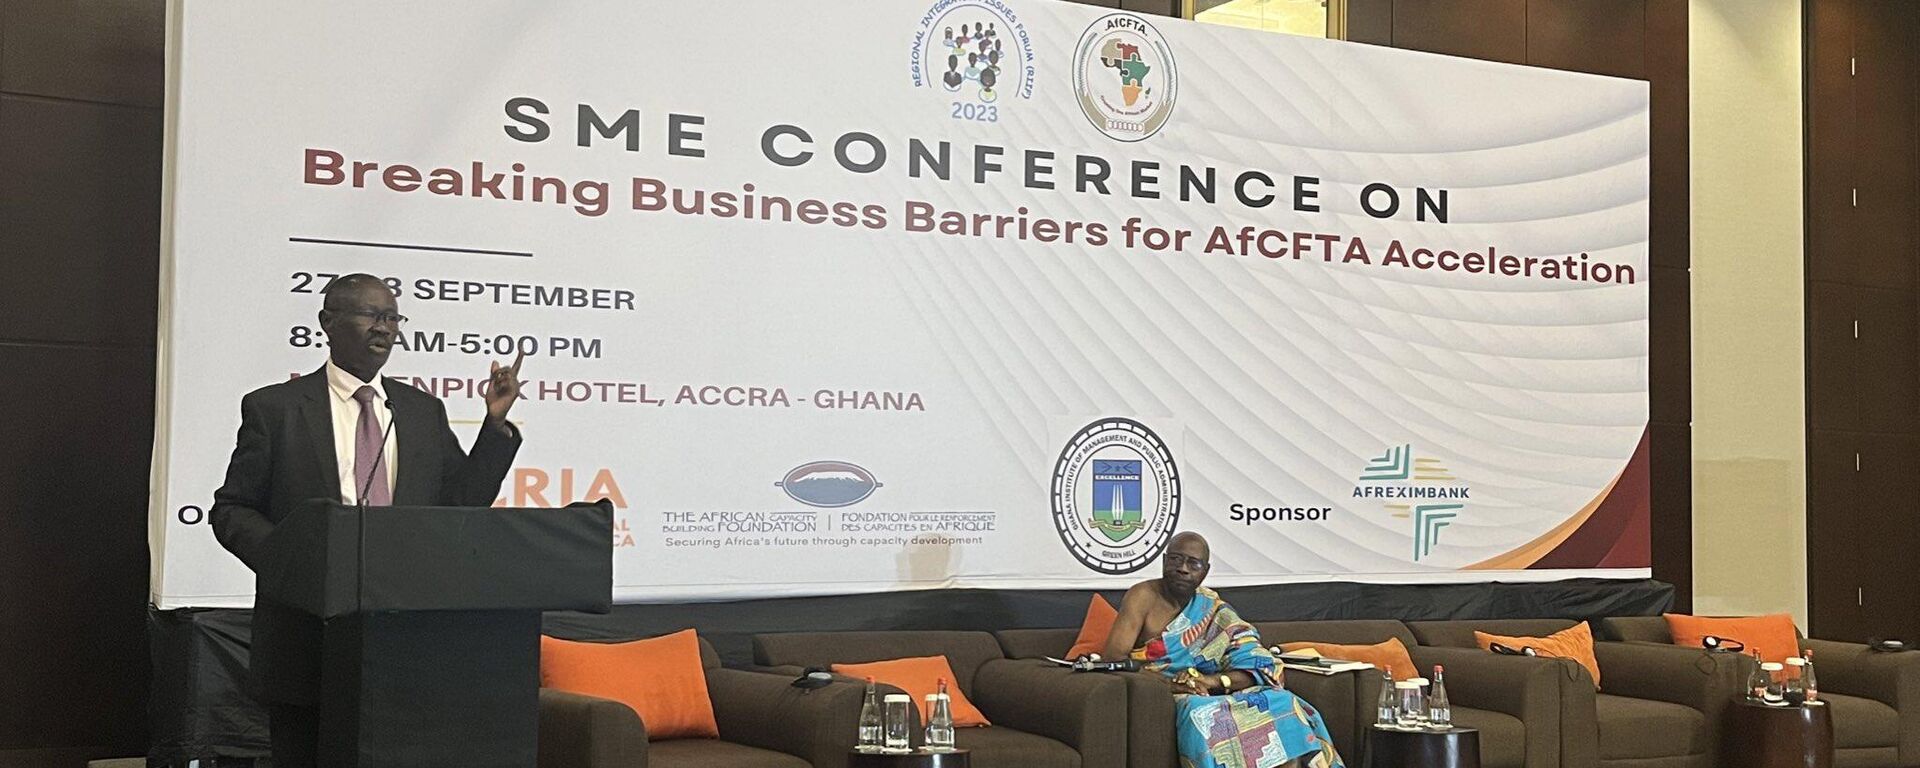 The Chief of Staff of the AfCFTA Secretariat is delivering opening remarks at the SME Conference on Breaking Business Barriers for AfCFTA Acceleration.  - Sputnik Africa, 1920, 06.10.2023